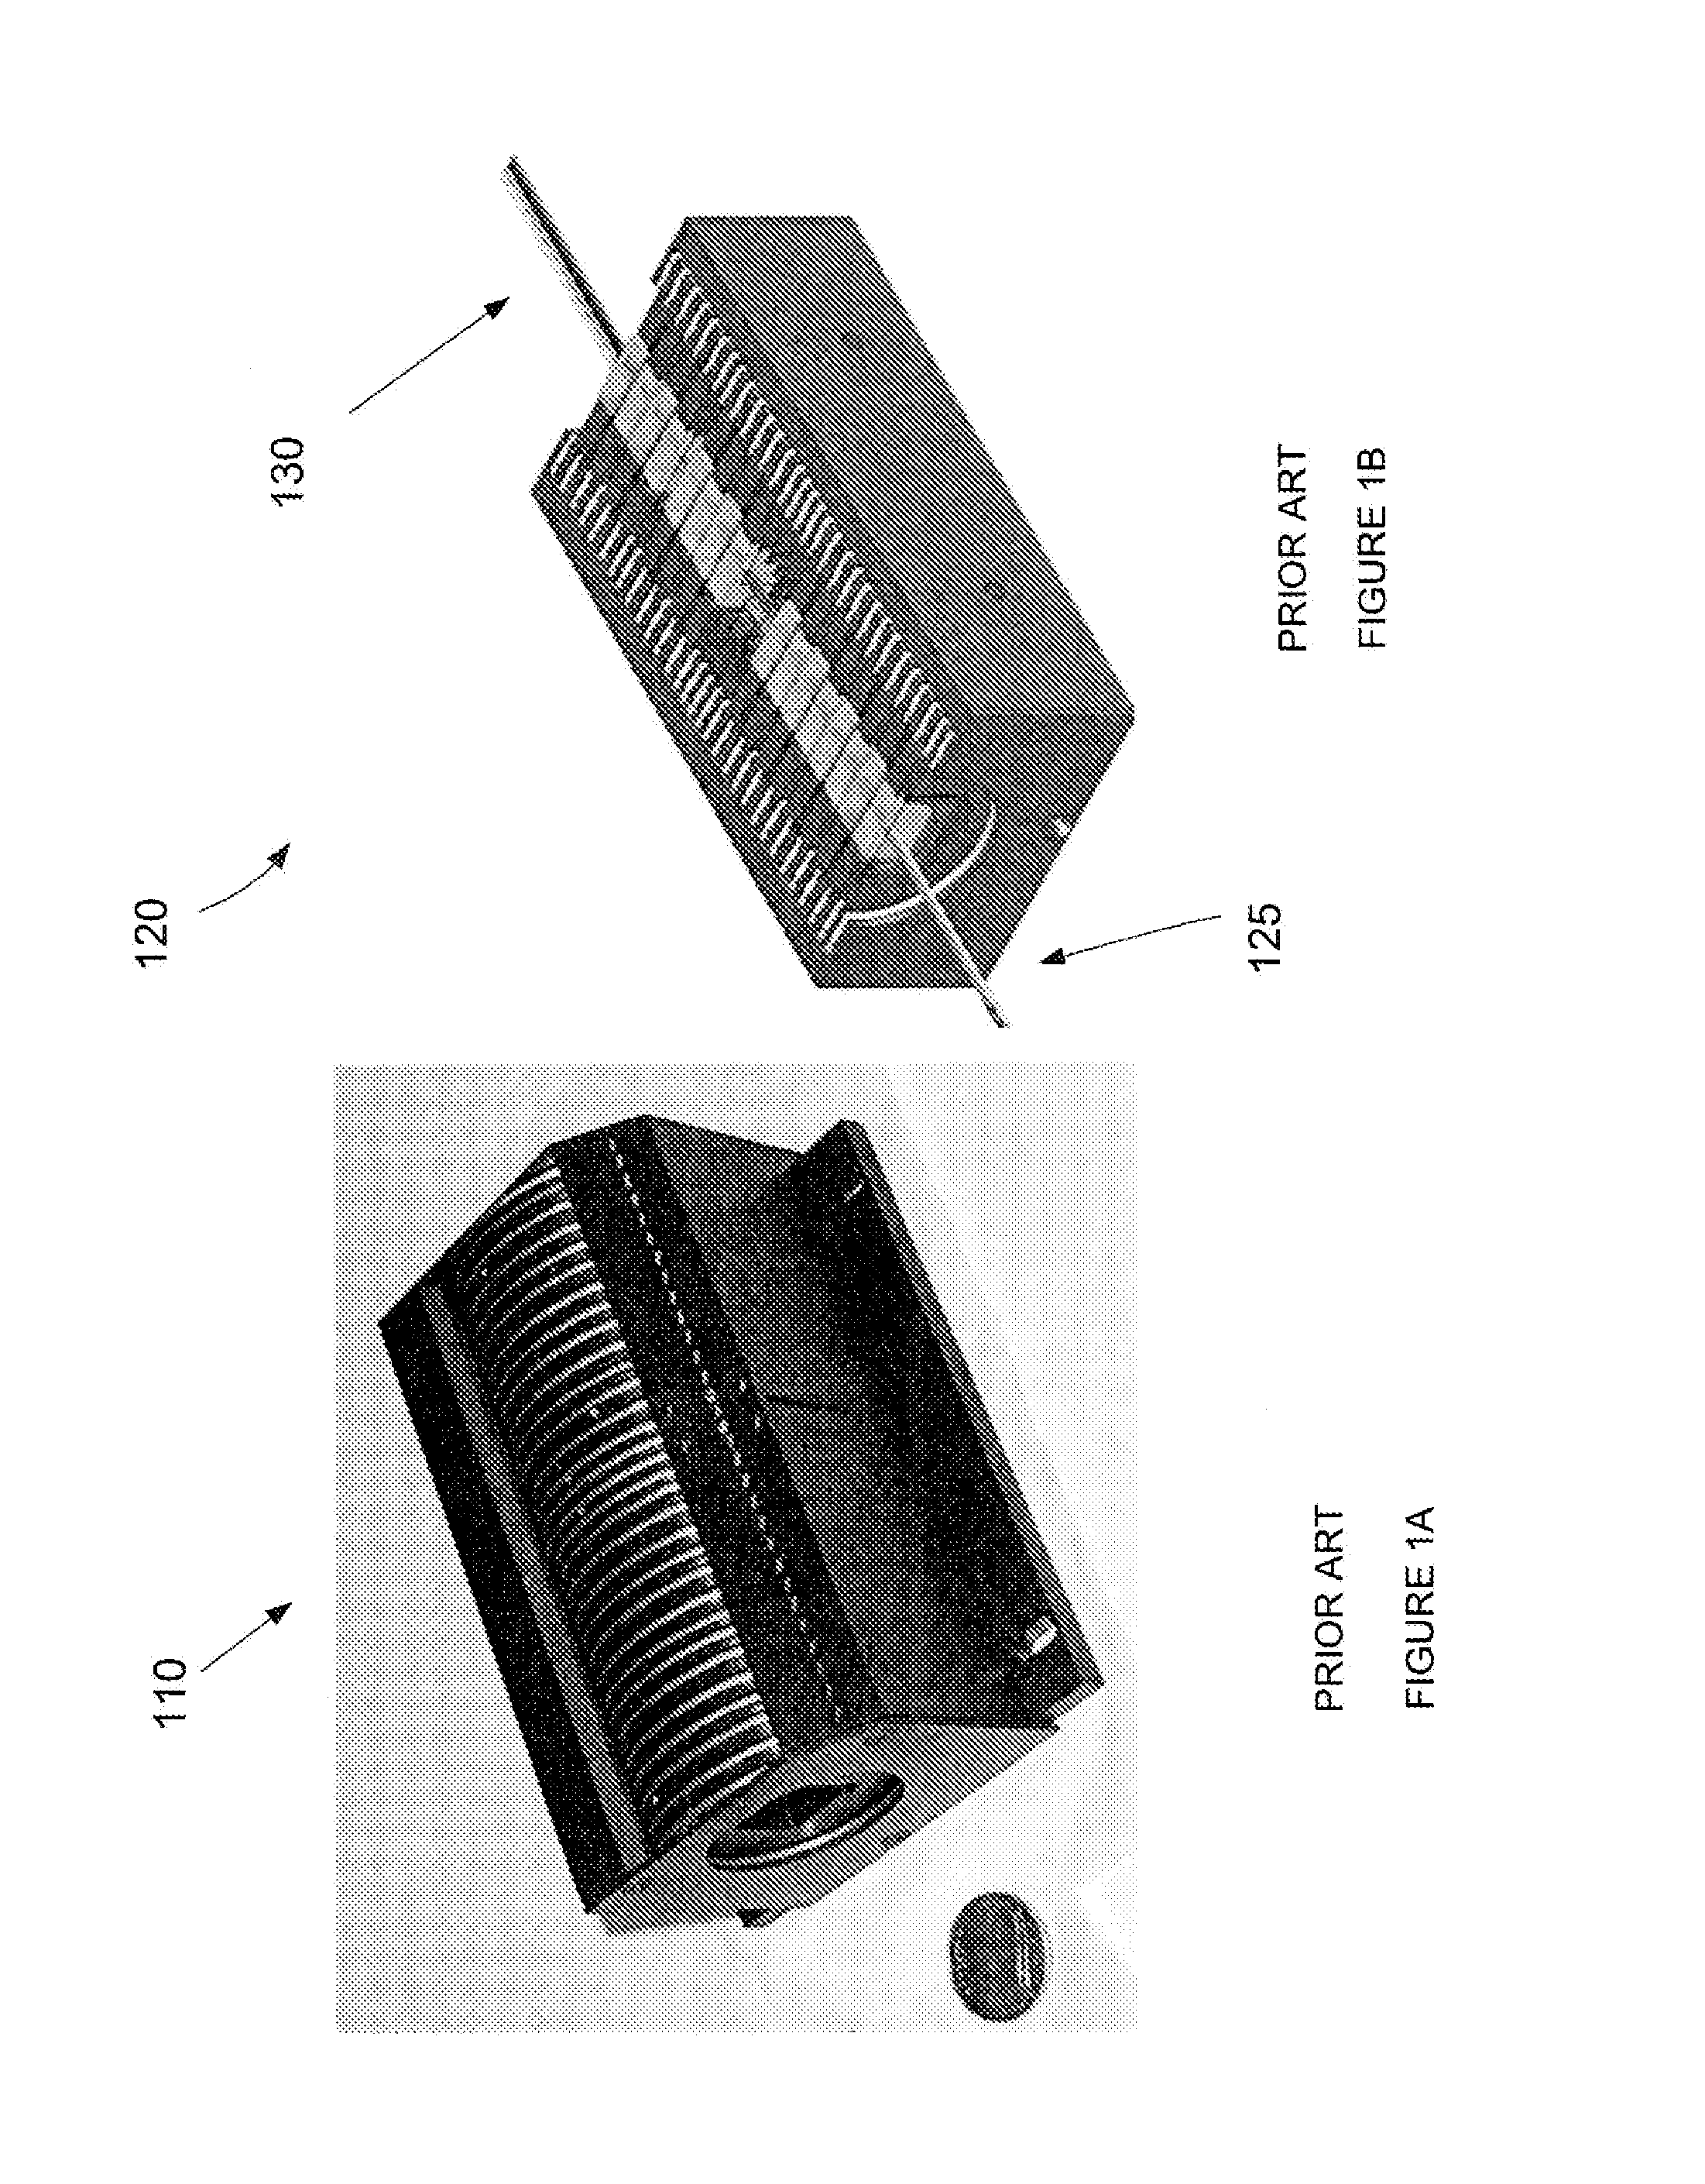 System and Method For a Self-Referencing Interferometer